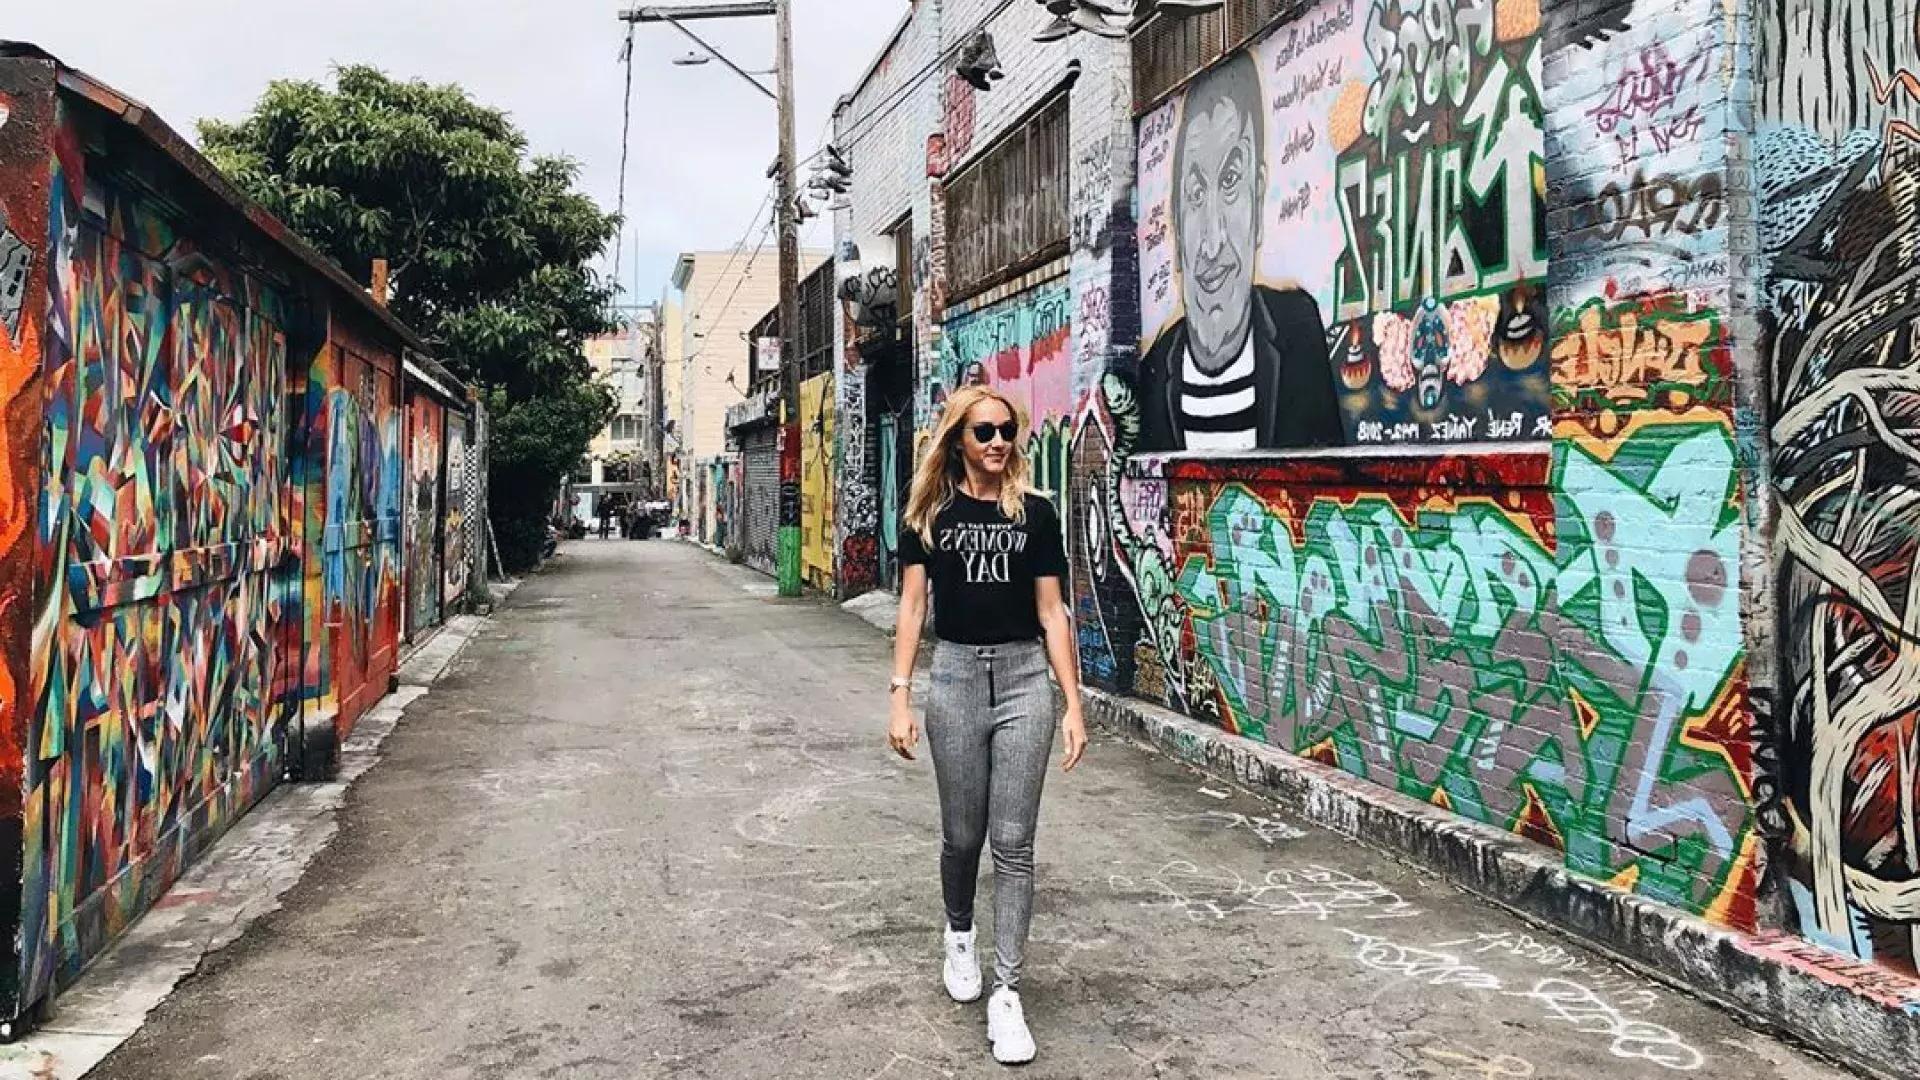 Walk down Clarion Alley is a must-do on your first visit to the Mission District.